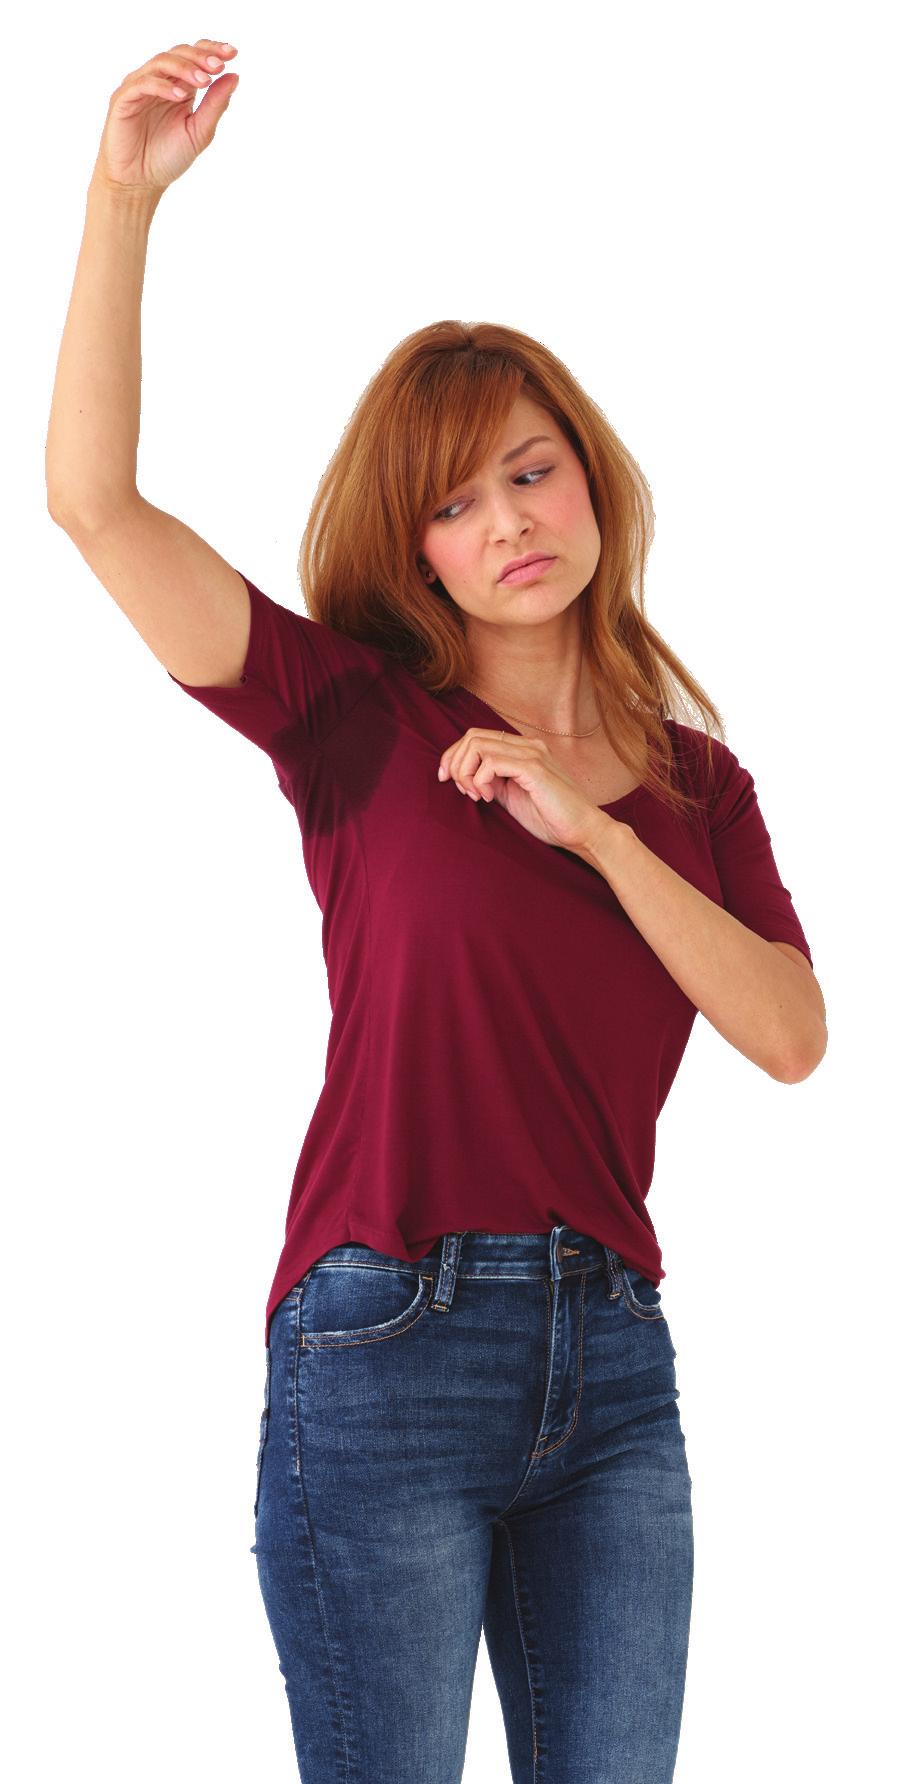 What s the deal with this excessive underarm sweating?